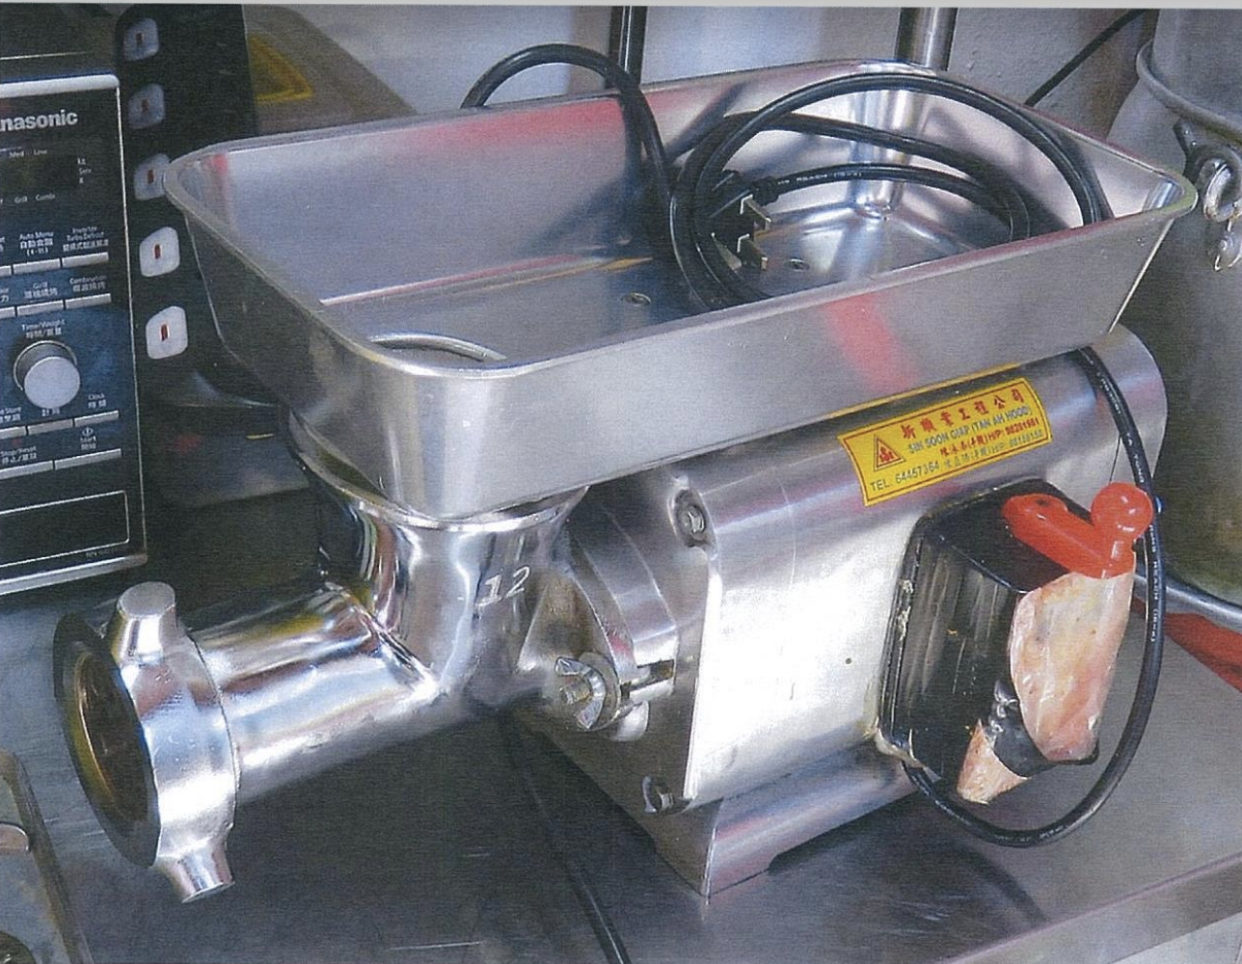 Photo of the electric meat grinder which was used. (PHOTO: Ministry of Manpower)